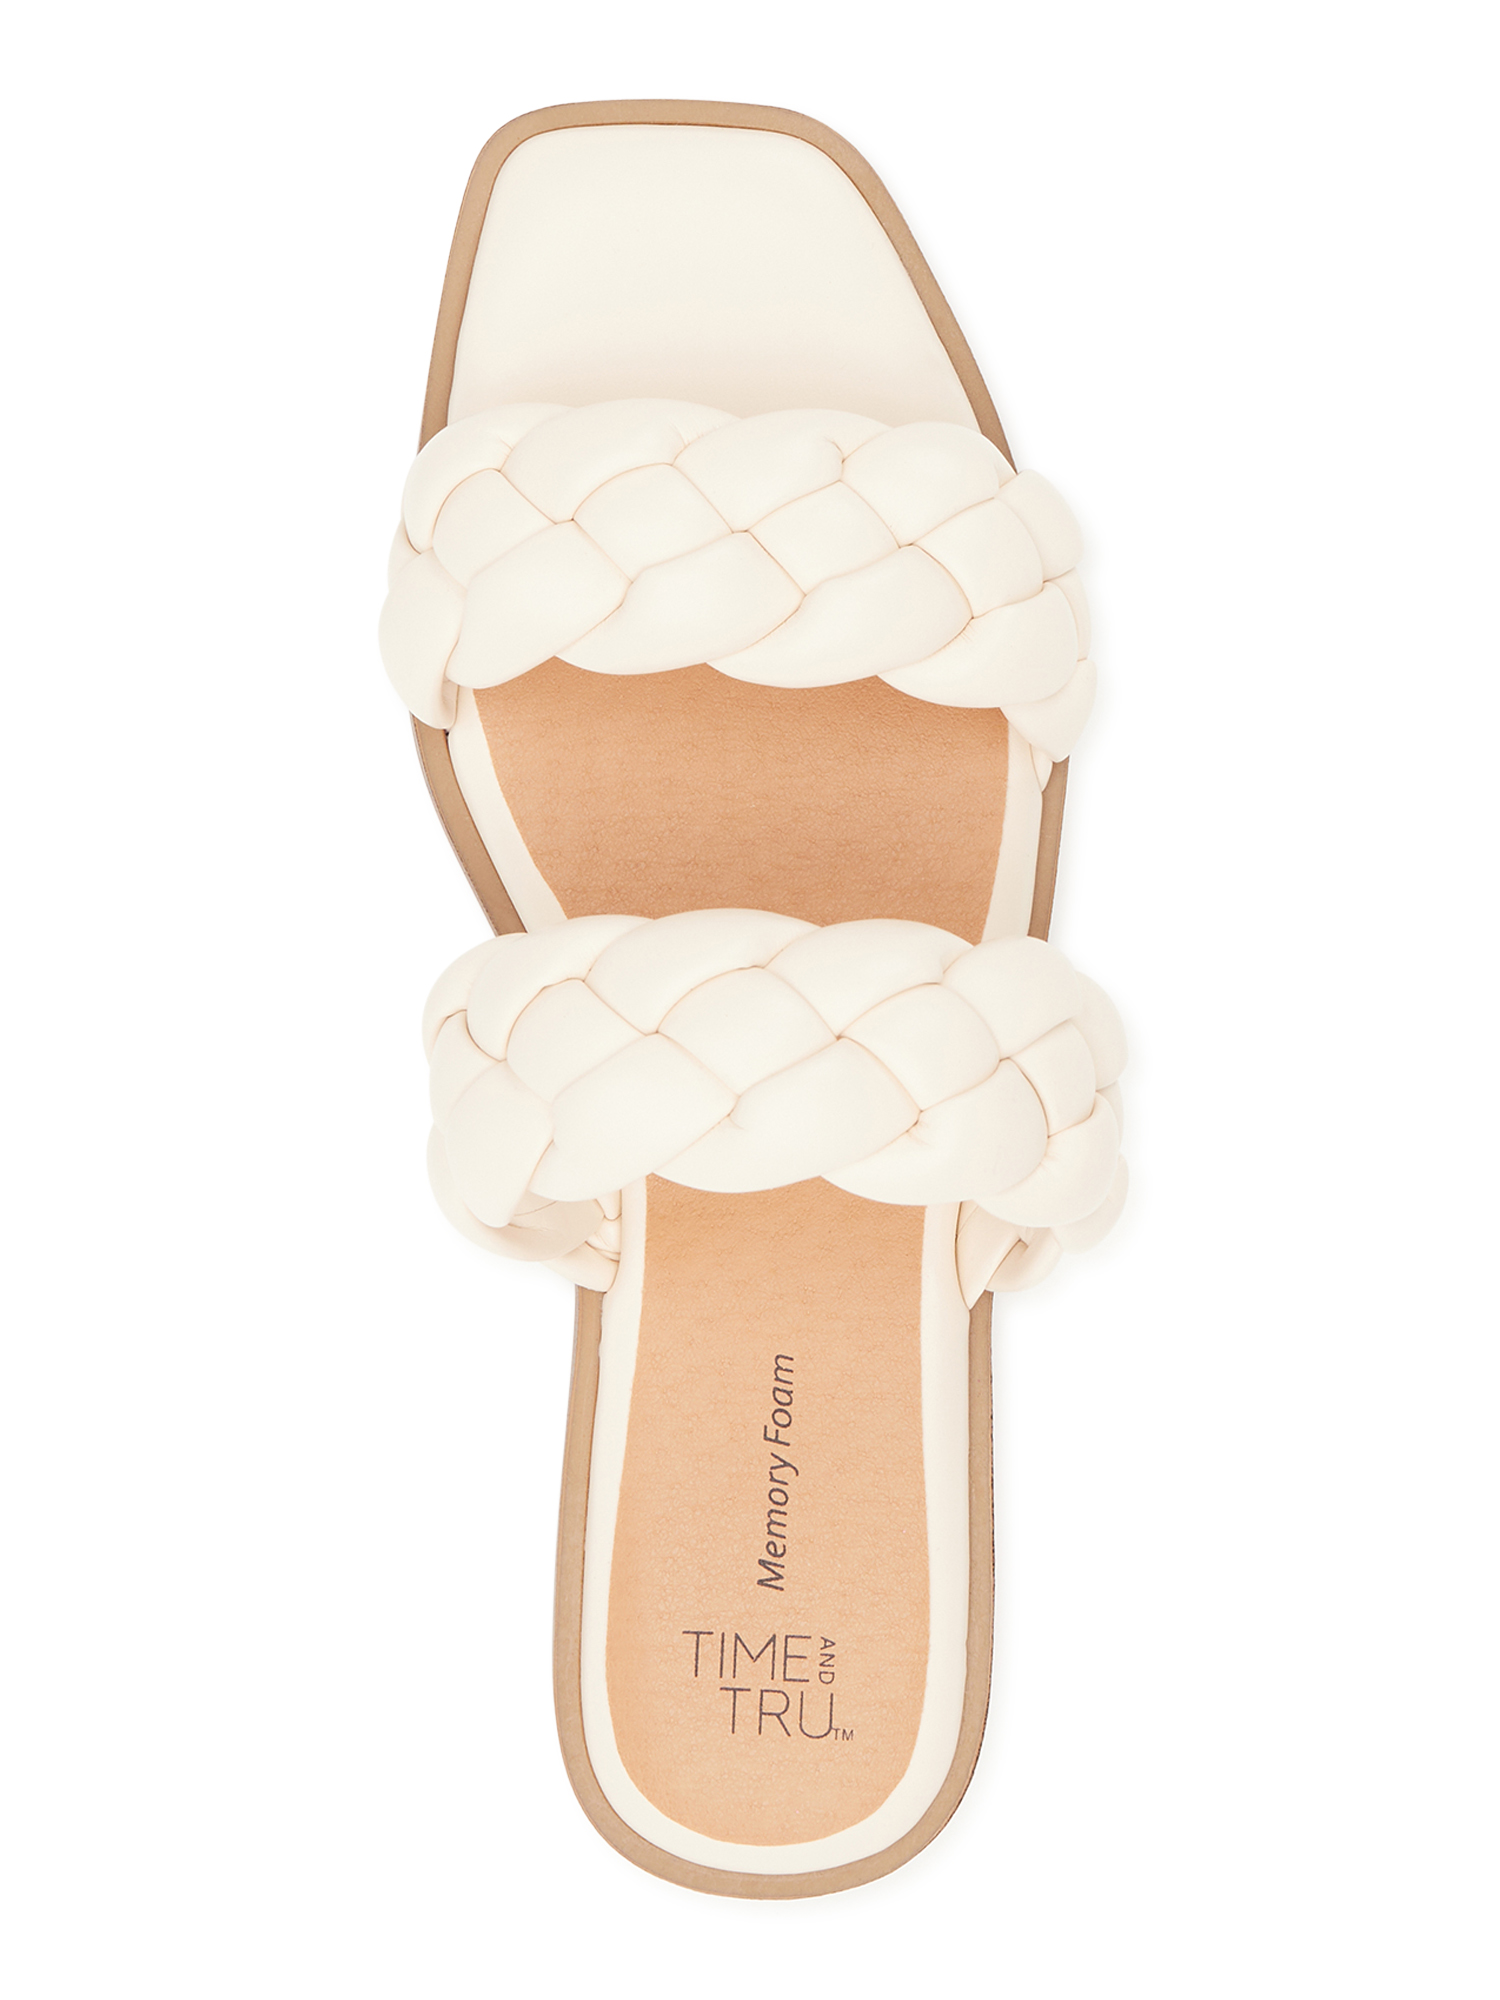 Time and Tru Women's Braided Two Band Sandals - image 2 of 5